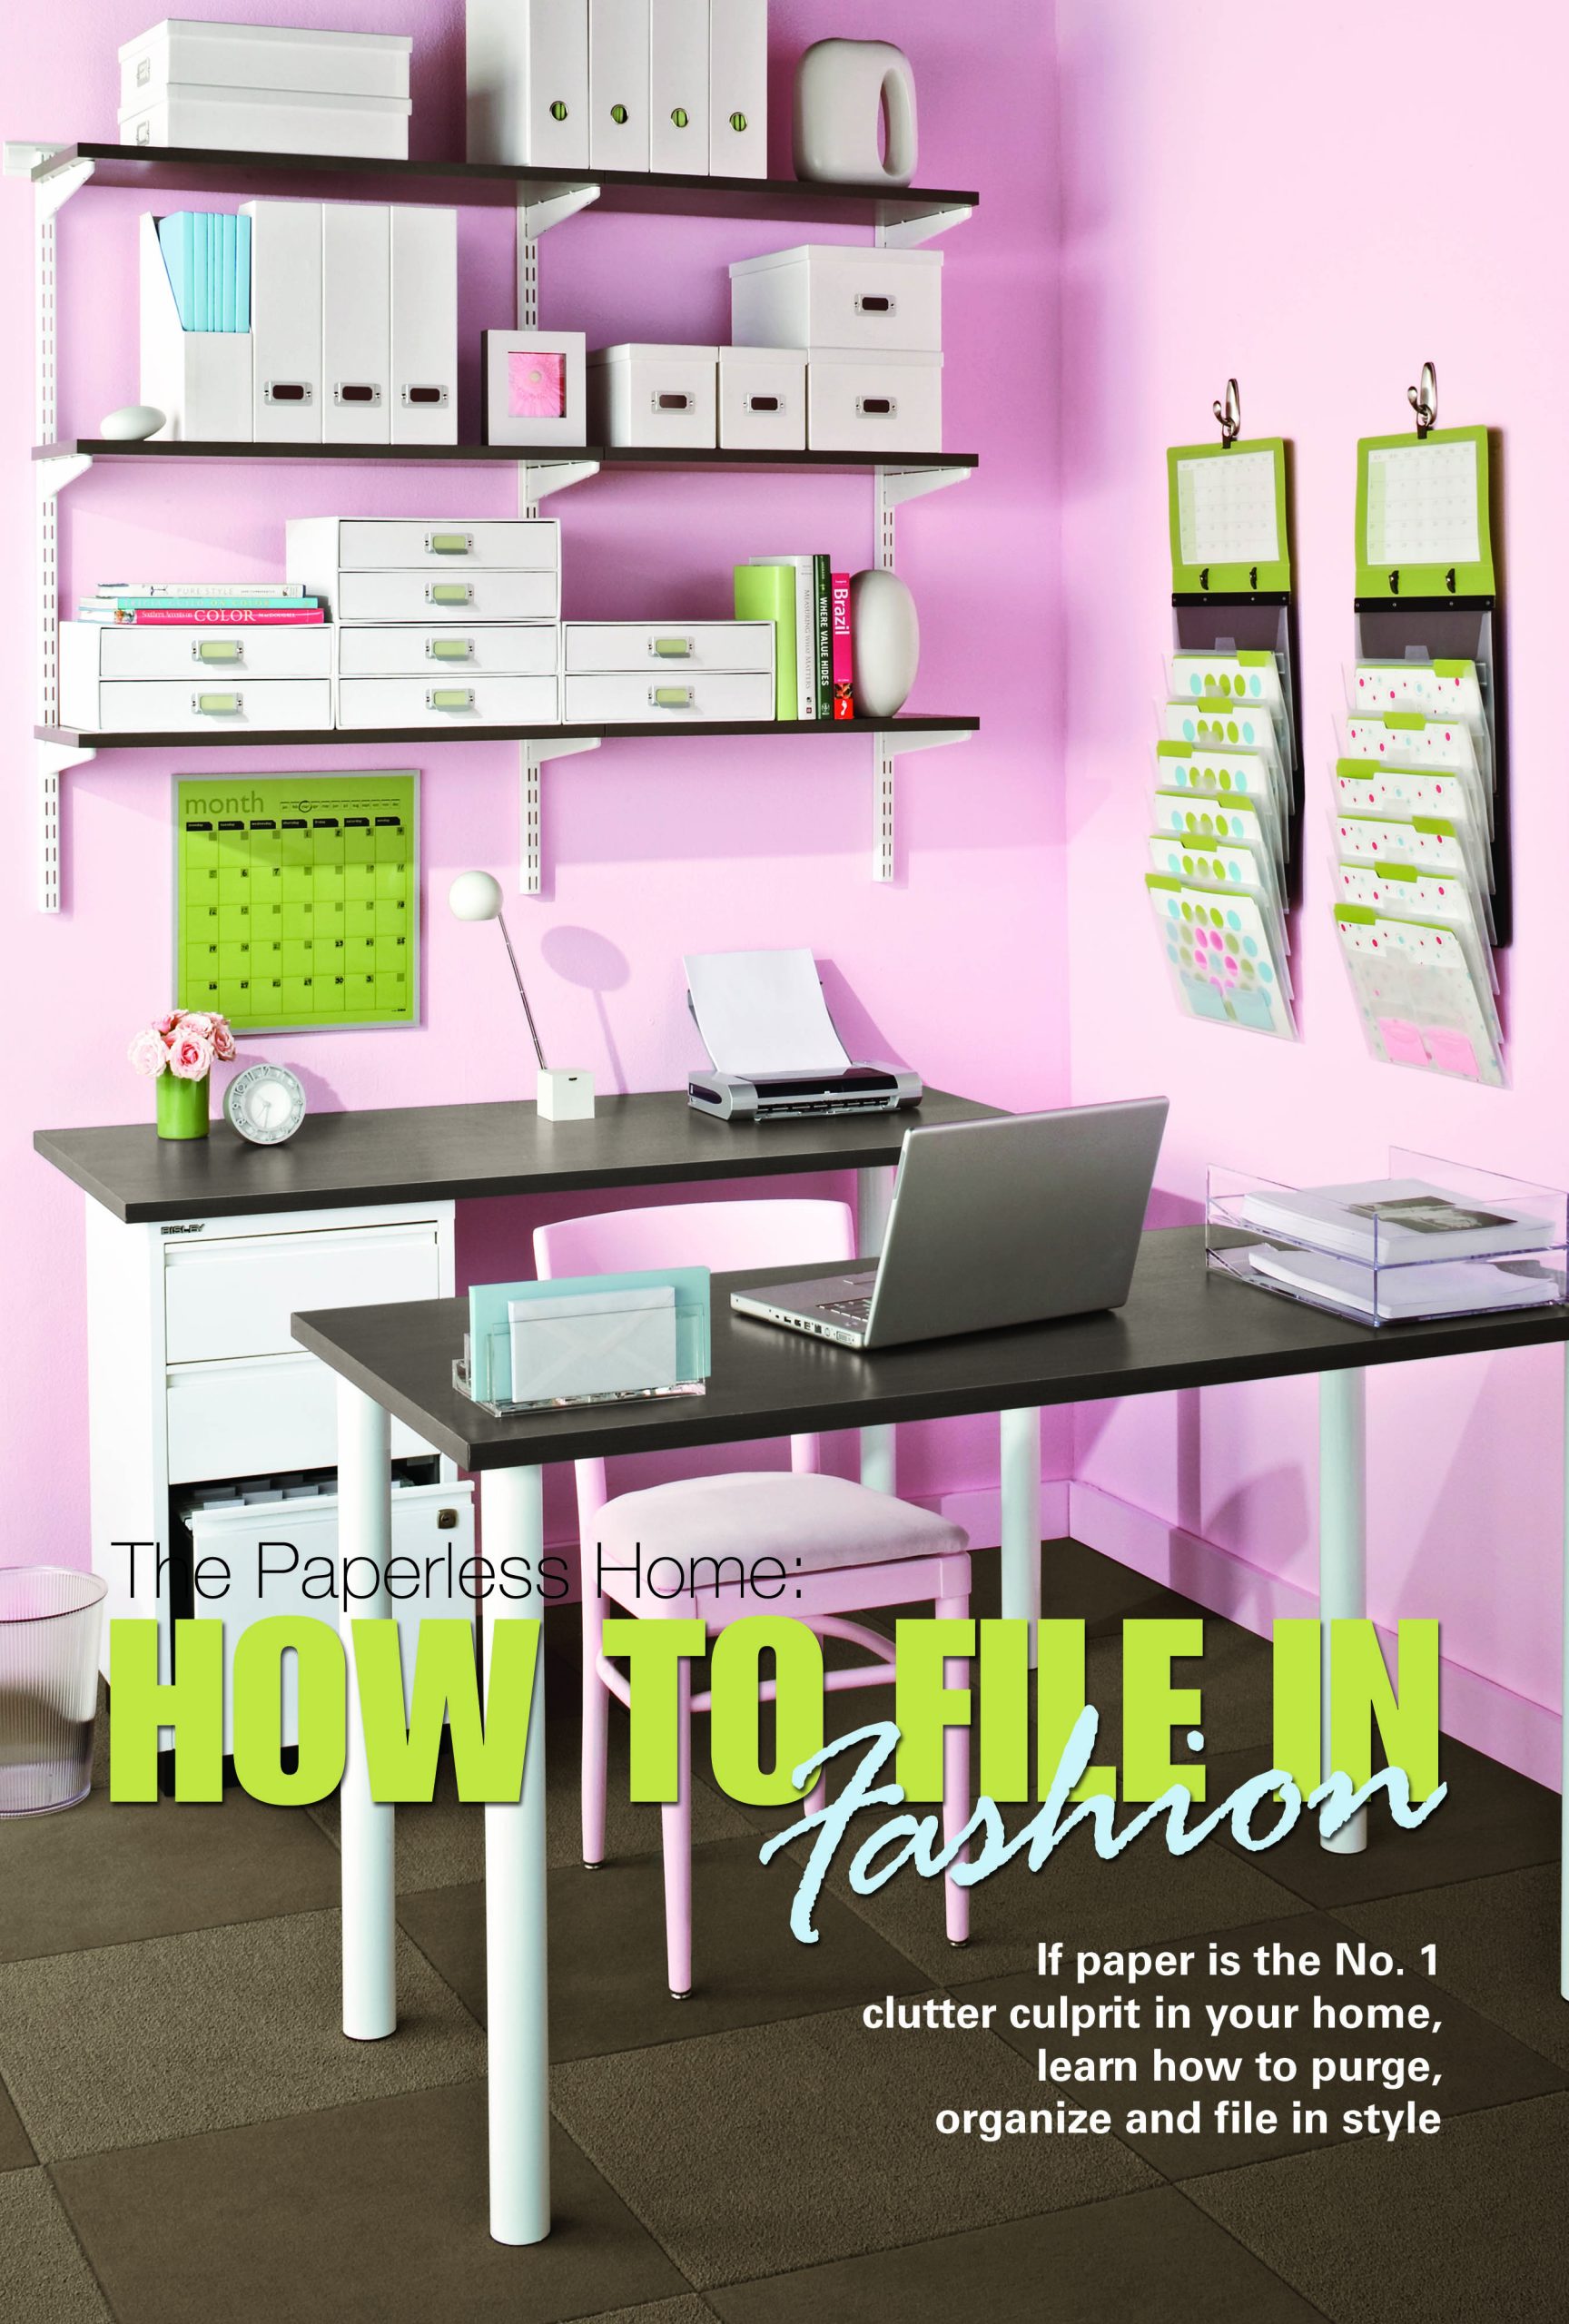 THE PAPERLESS HOME: HOW TO FILE IN FASHION